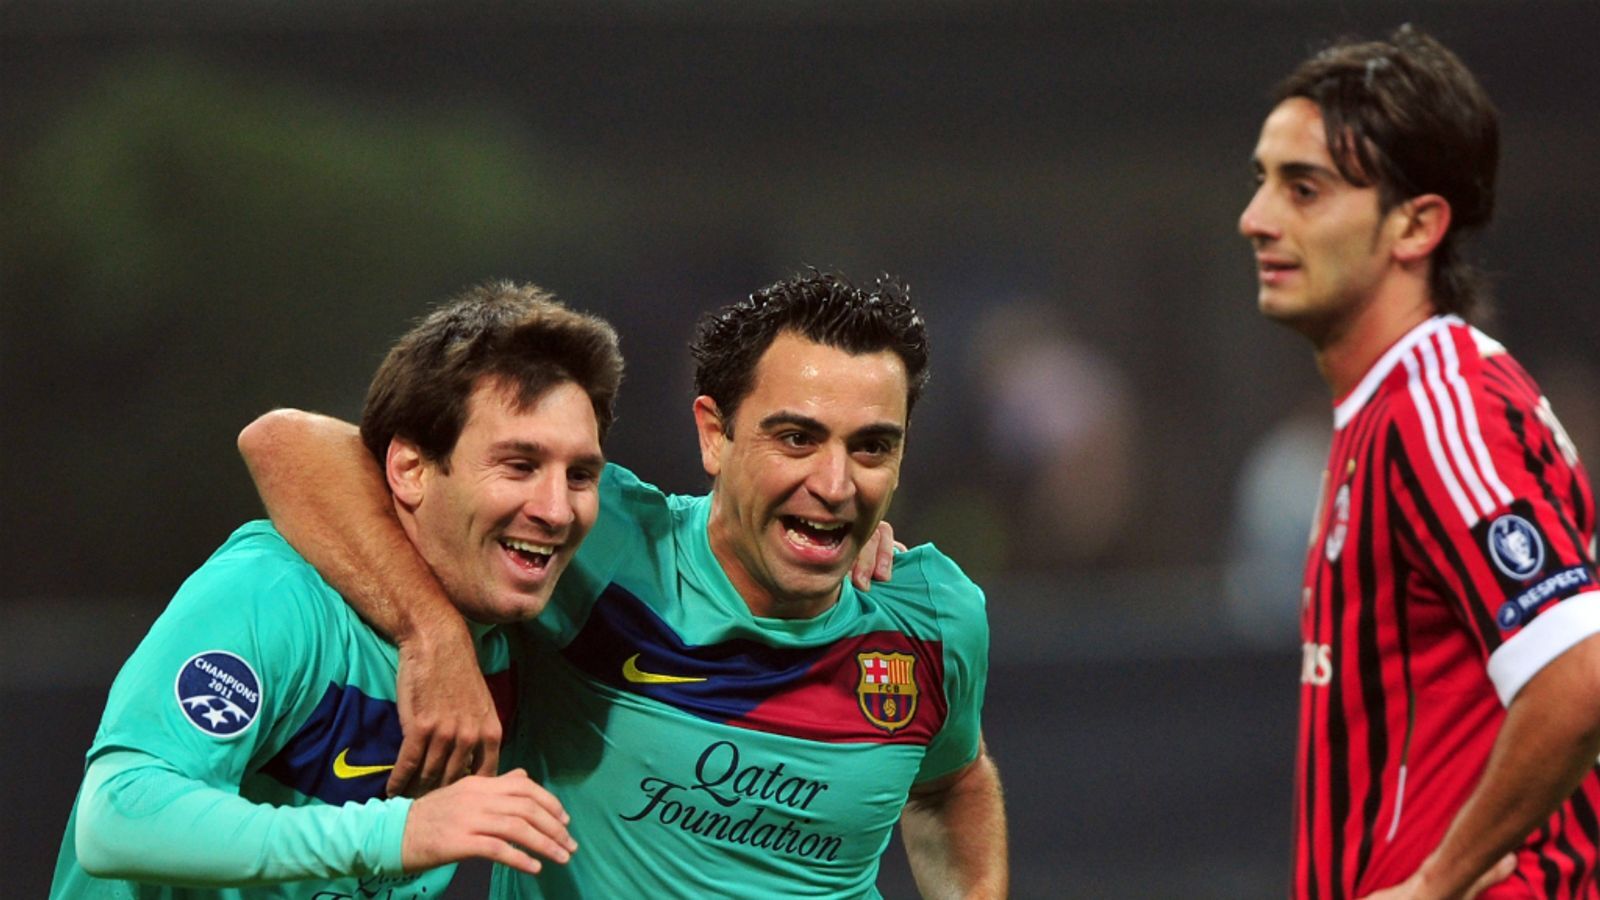 Eto Told Xavi to Return to Barcelona while the ‘God of Football’ Messi Still Played